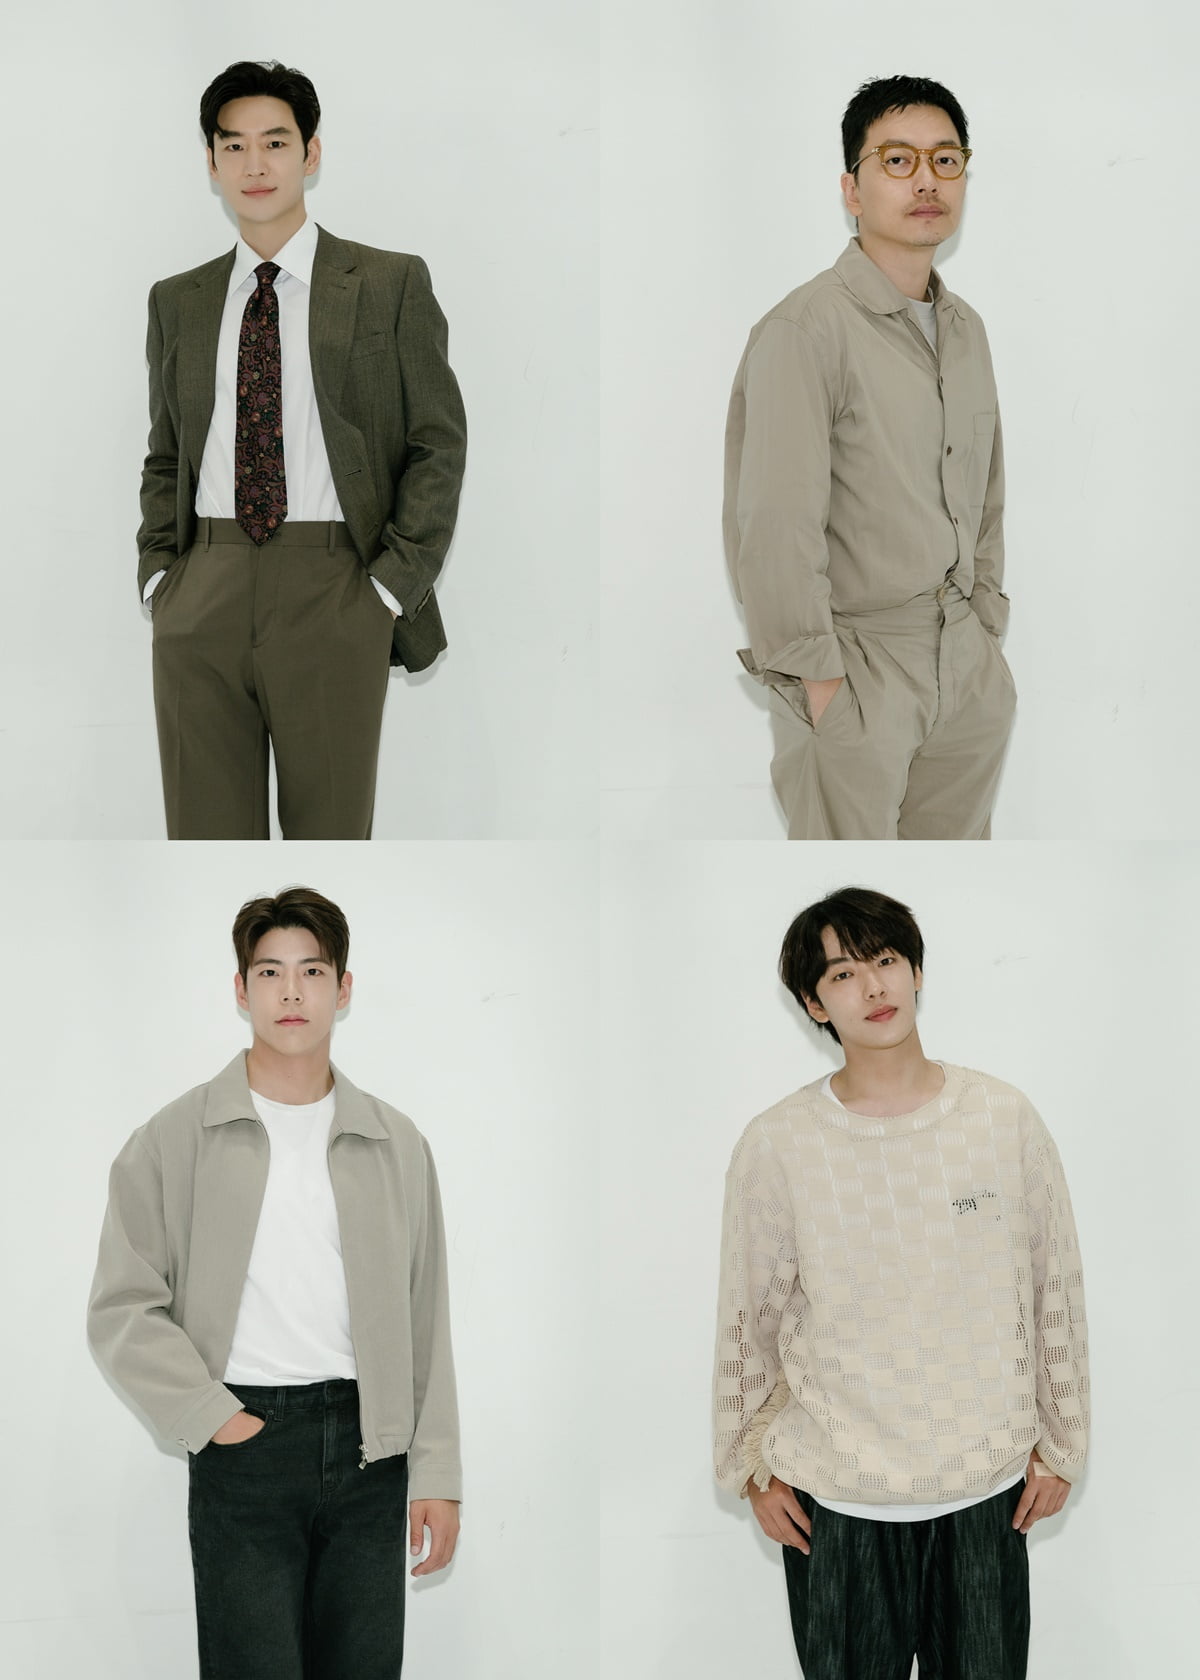 Lee Je-hoon, Lee Dong-hwi, Choi Woo-seong, Shin Hyeon-soo, optimized line-up for investigations